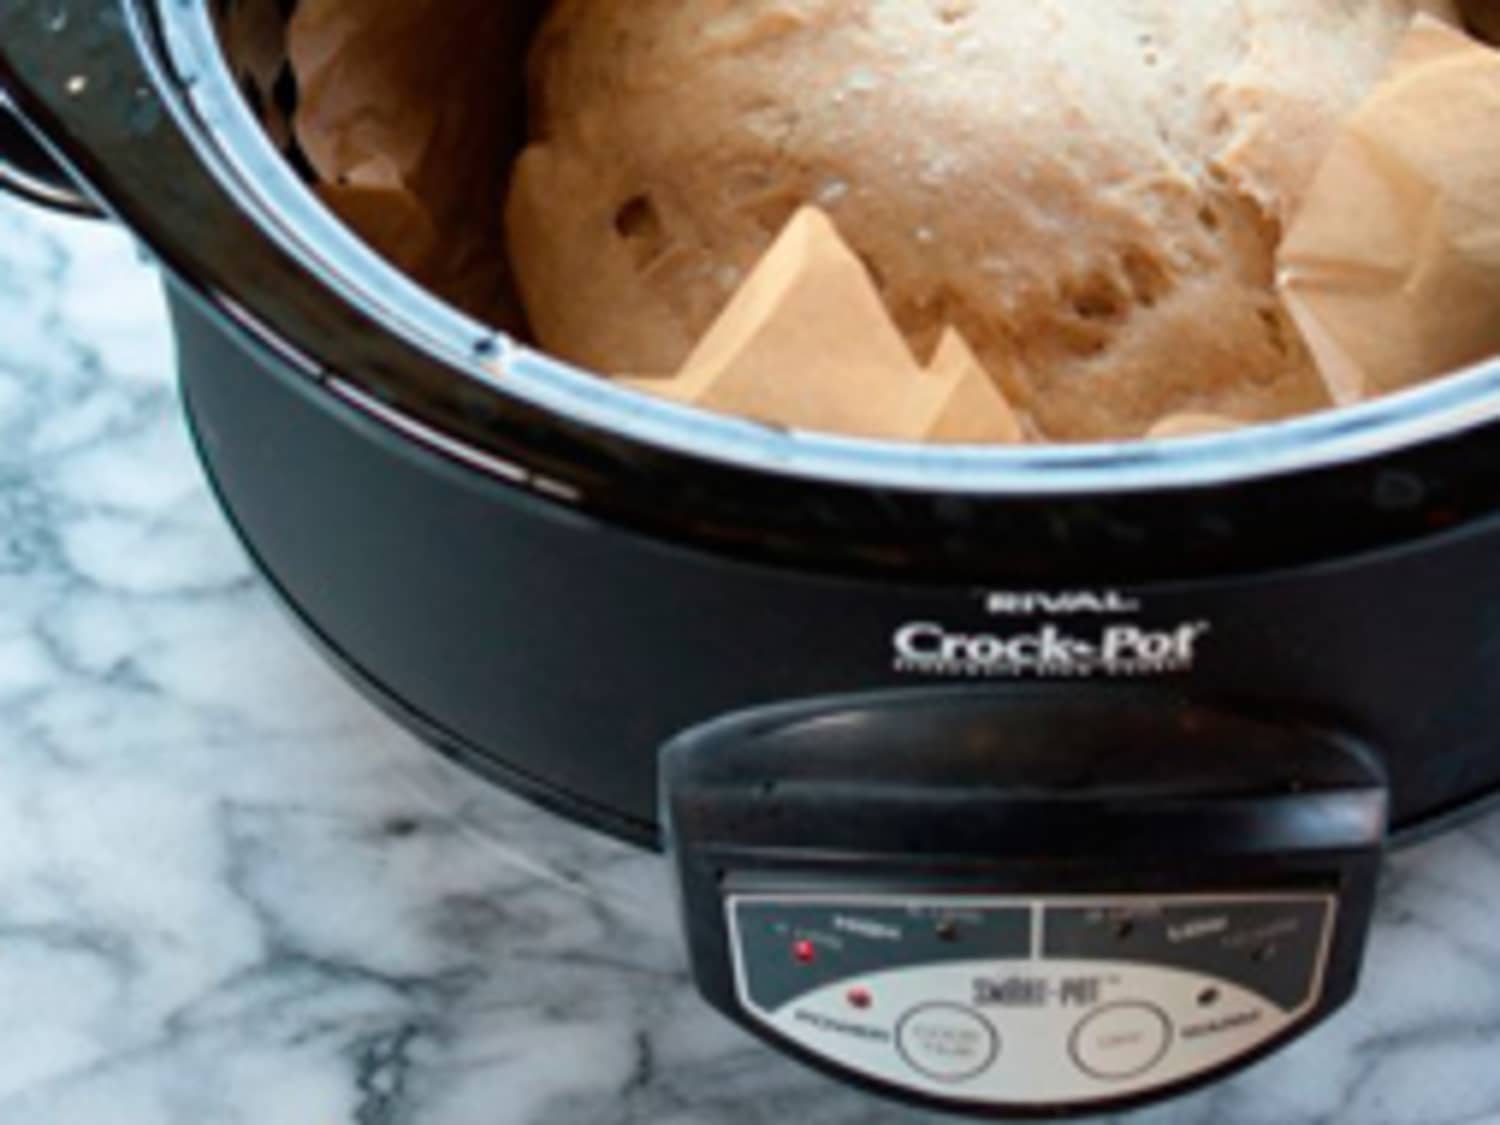 The Best Lead-Free Slow Cookers and Crock Pots for the Kitchen - Dengarden